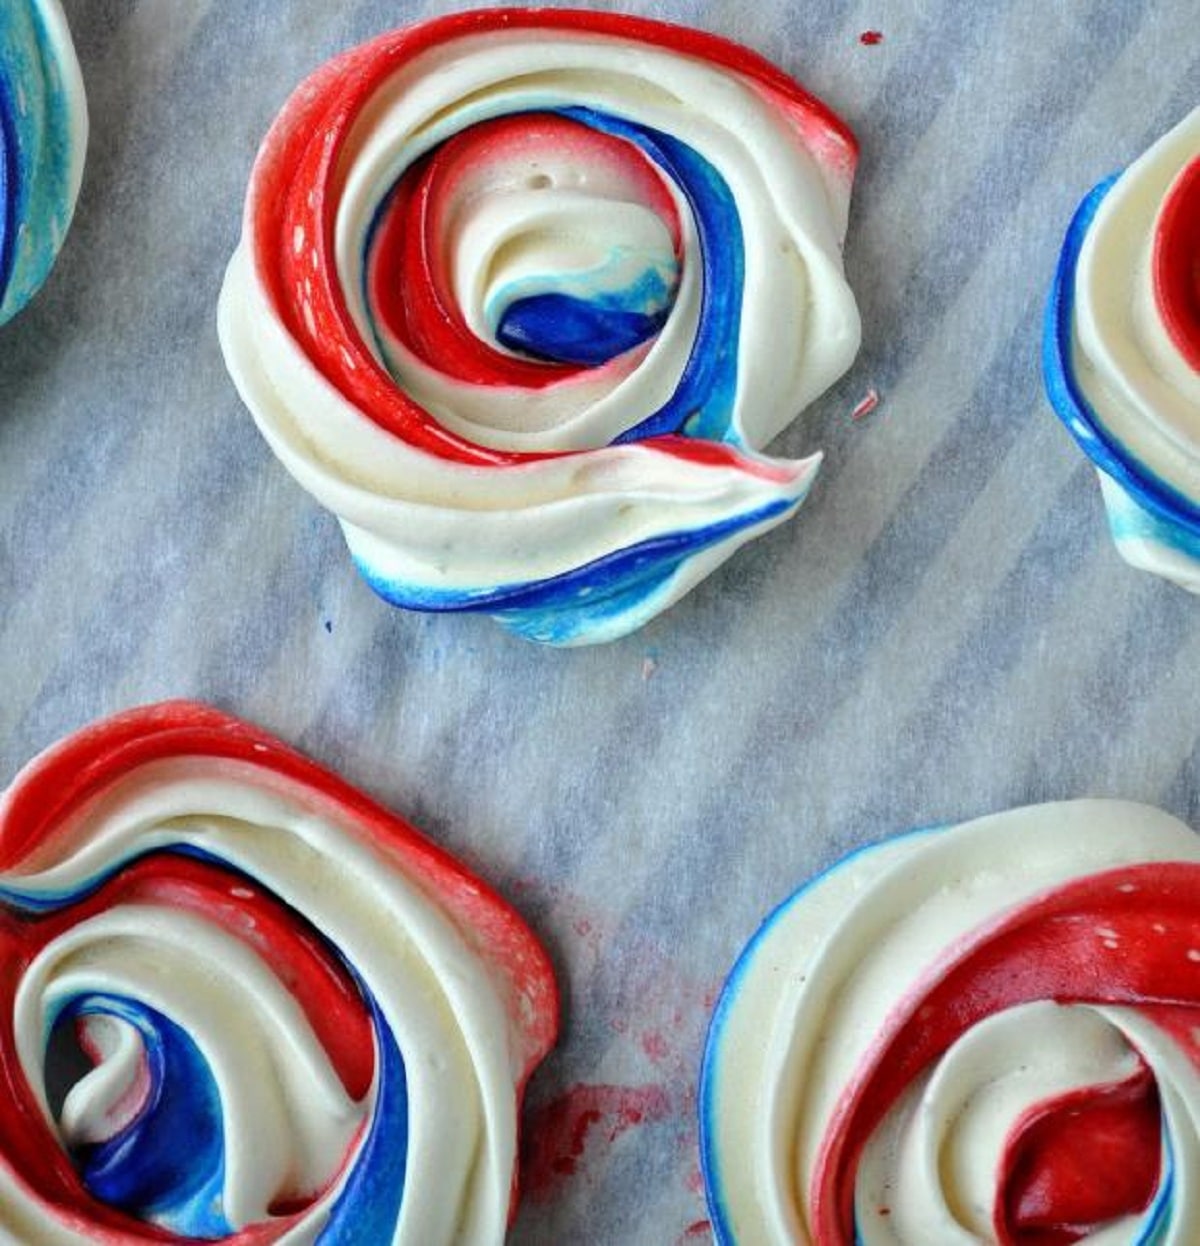 Swirls of red white and blue frosting on parchment paper